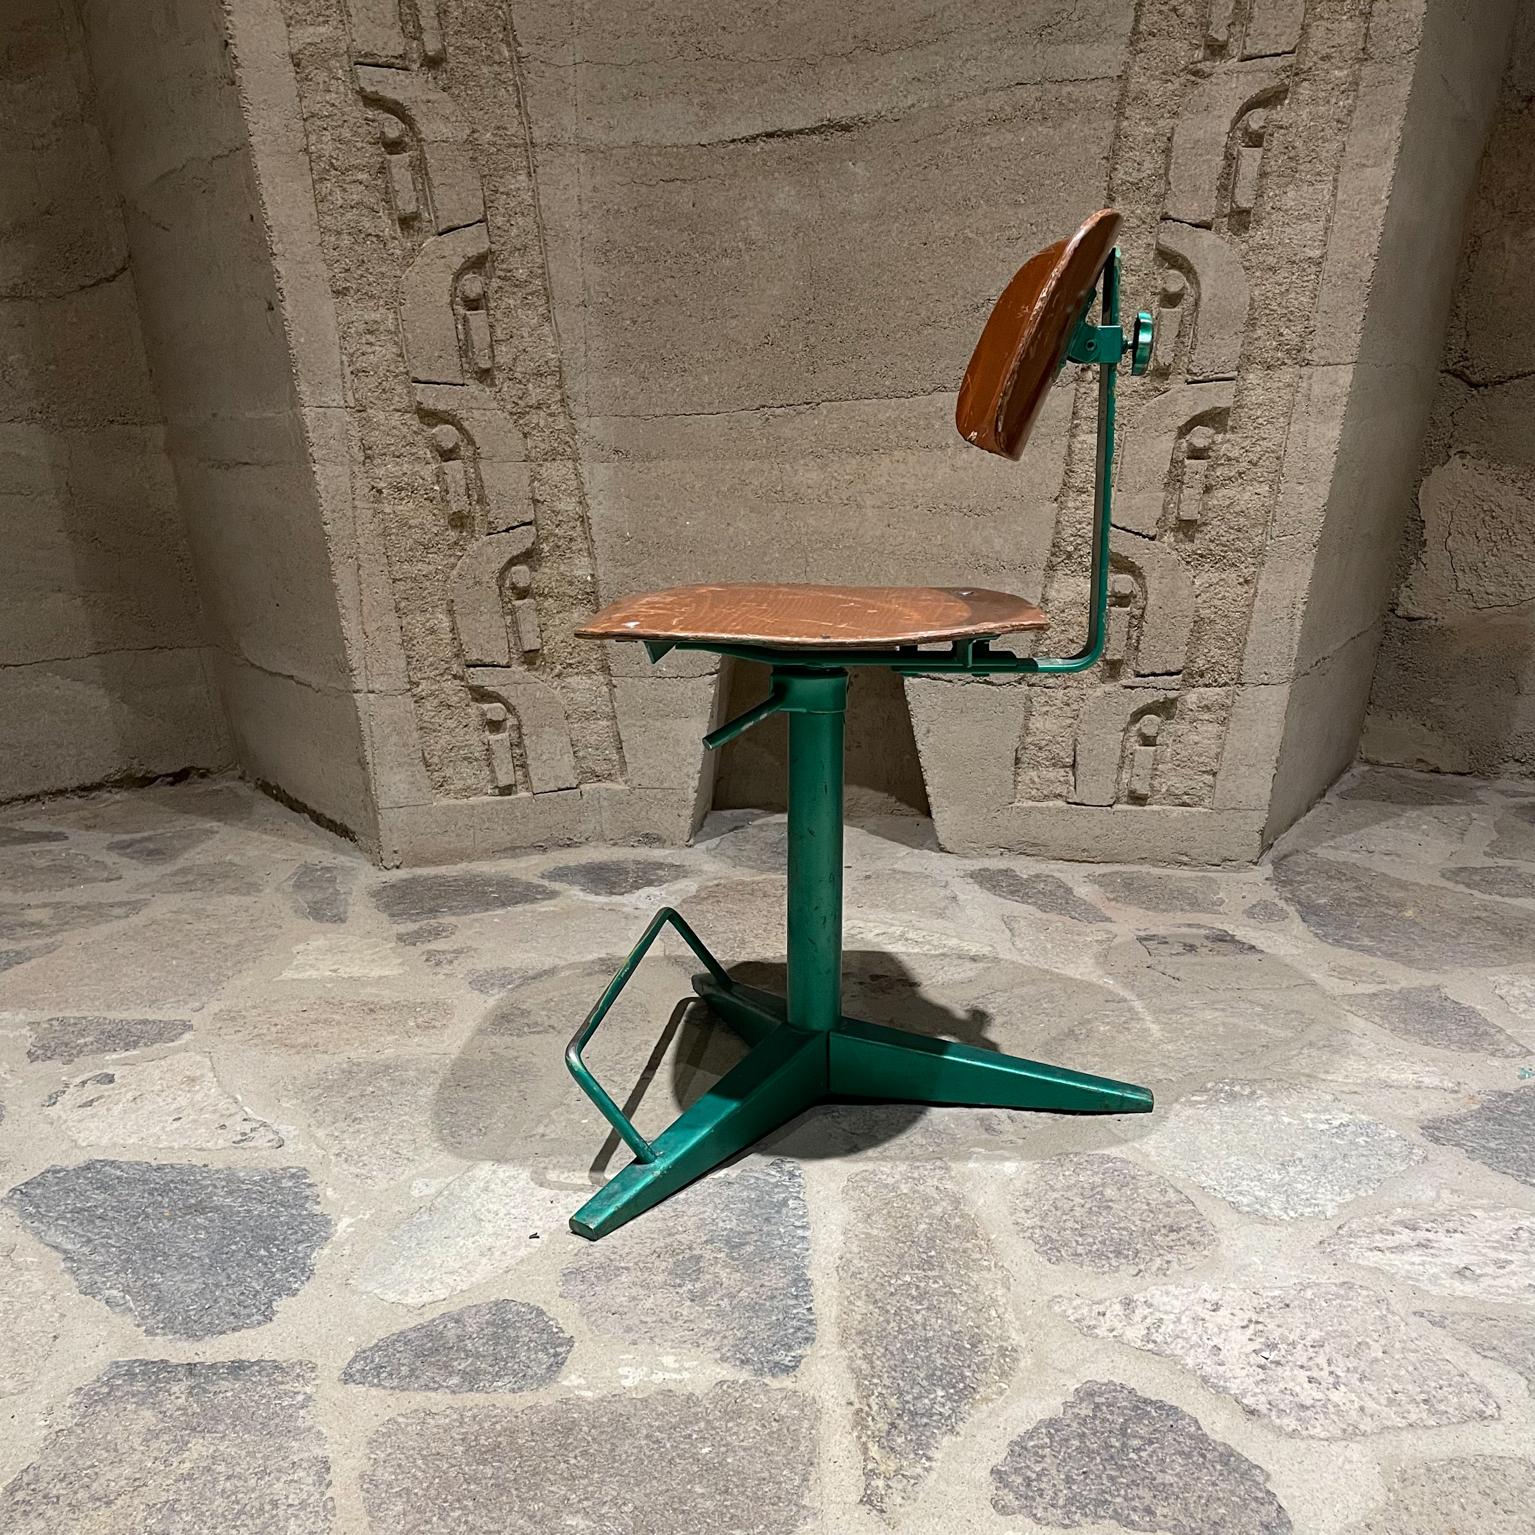 Fab French Prouve 1950s Style Green Office Chair Plywood Tripod Base + Footrest In Good Condition For Sale In Chula Vista, CA